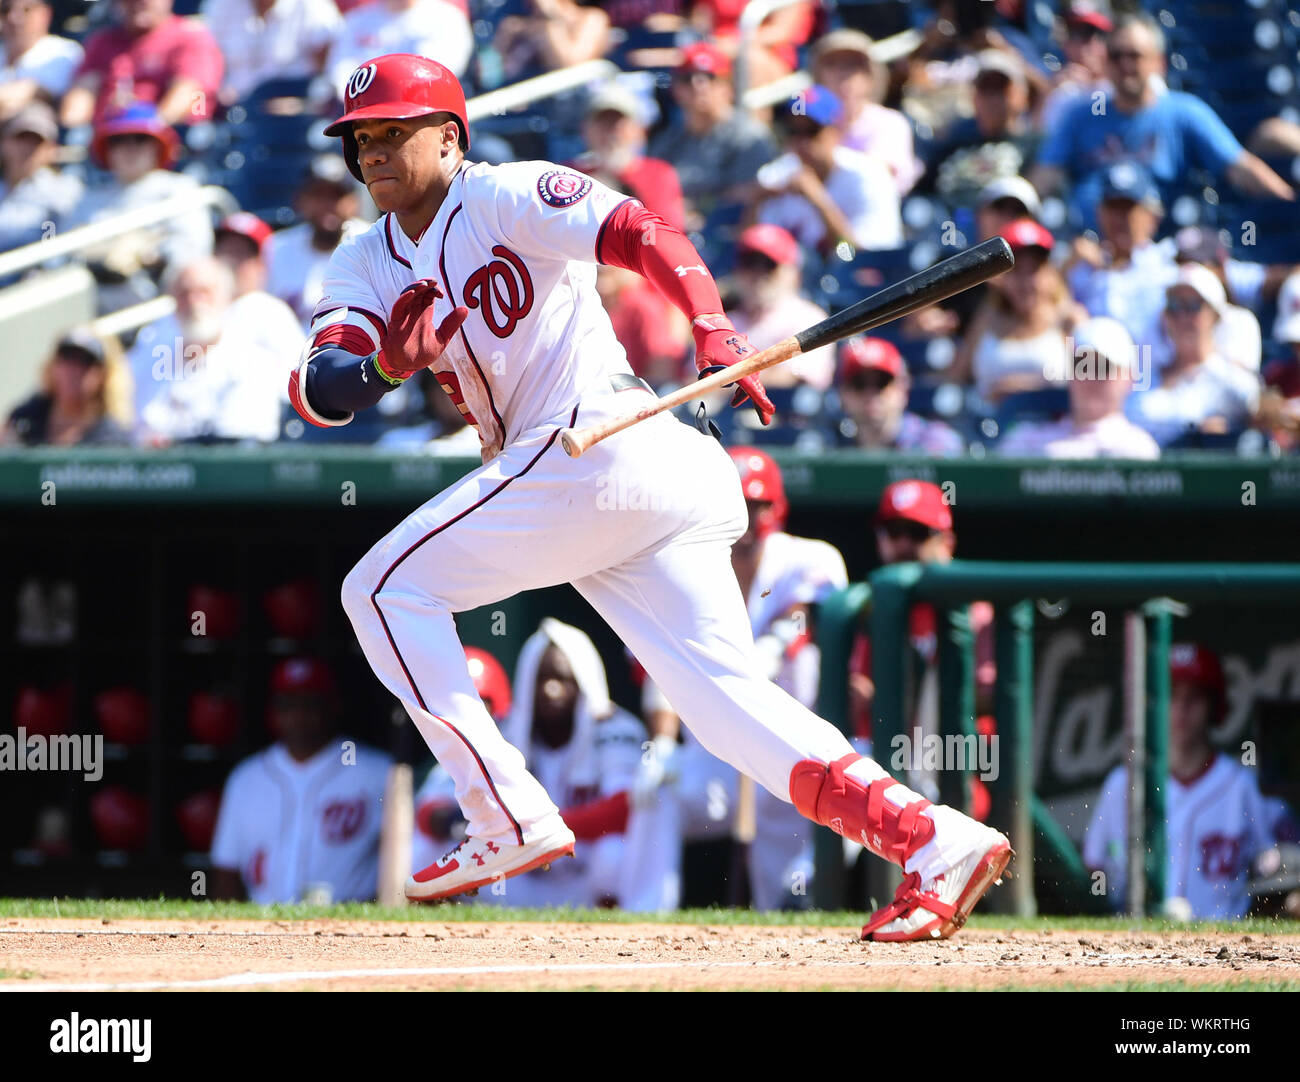 Washington, United States. 04th Sep, 2019. Washington Nationals left fielder Juan Soto (22) bunts against the New York Mets in the fifth inning at National Park in Washington, DC on Wednesday, September 4, 2019. Photo by Kevin Dietsch/UPI Credit: UPI/Alamy Live News Stock Photo